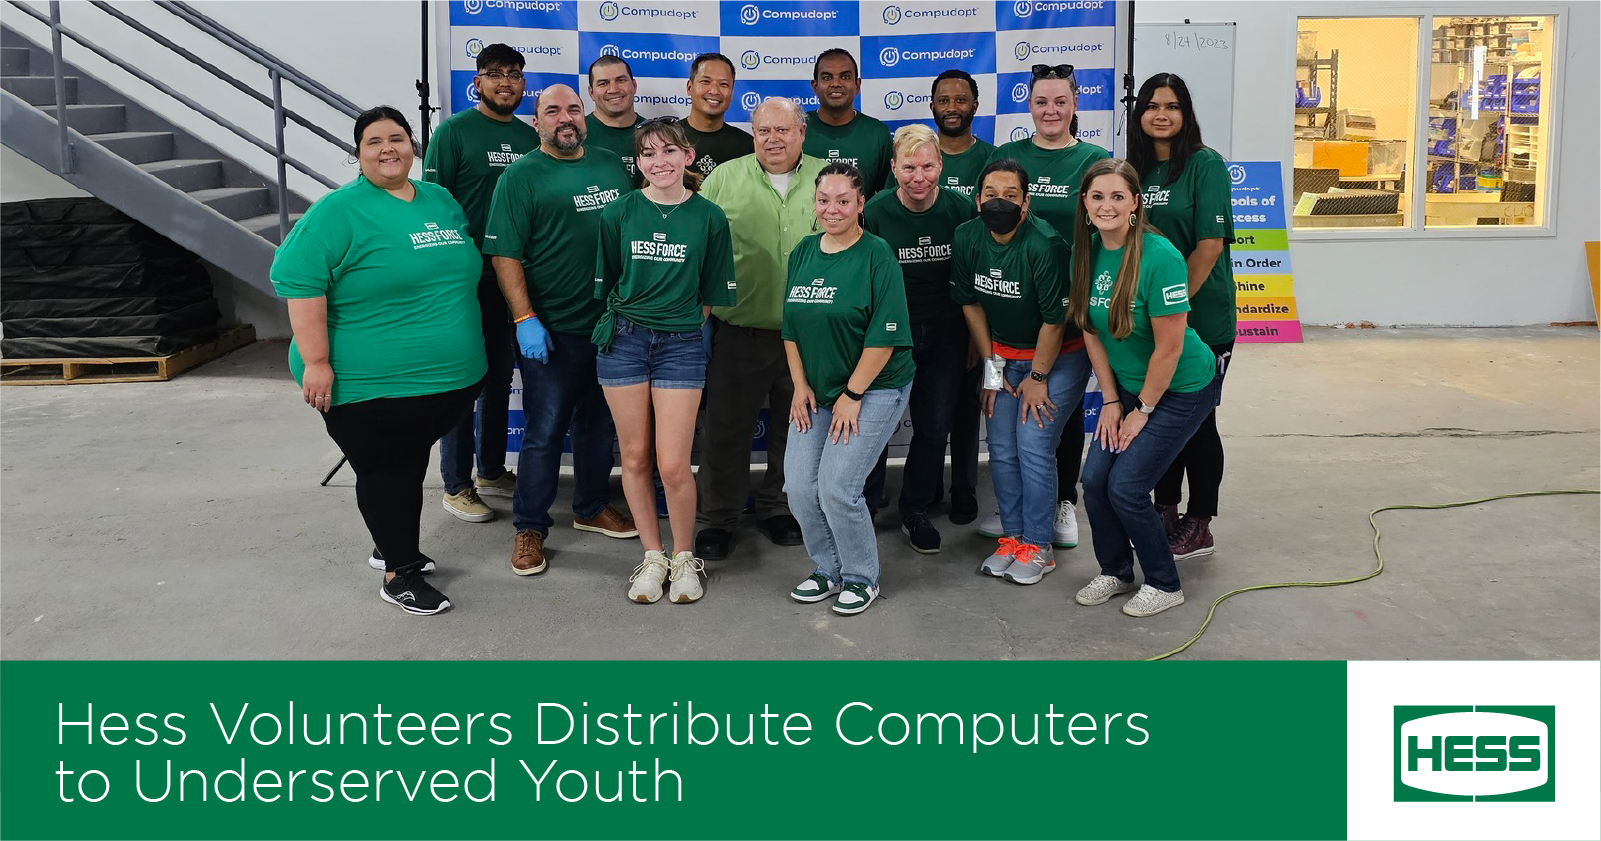 Hess Volunteers Distribute Computers to Underserved Youth